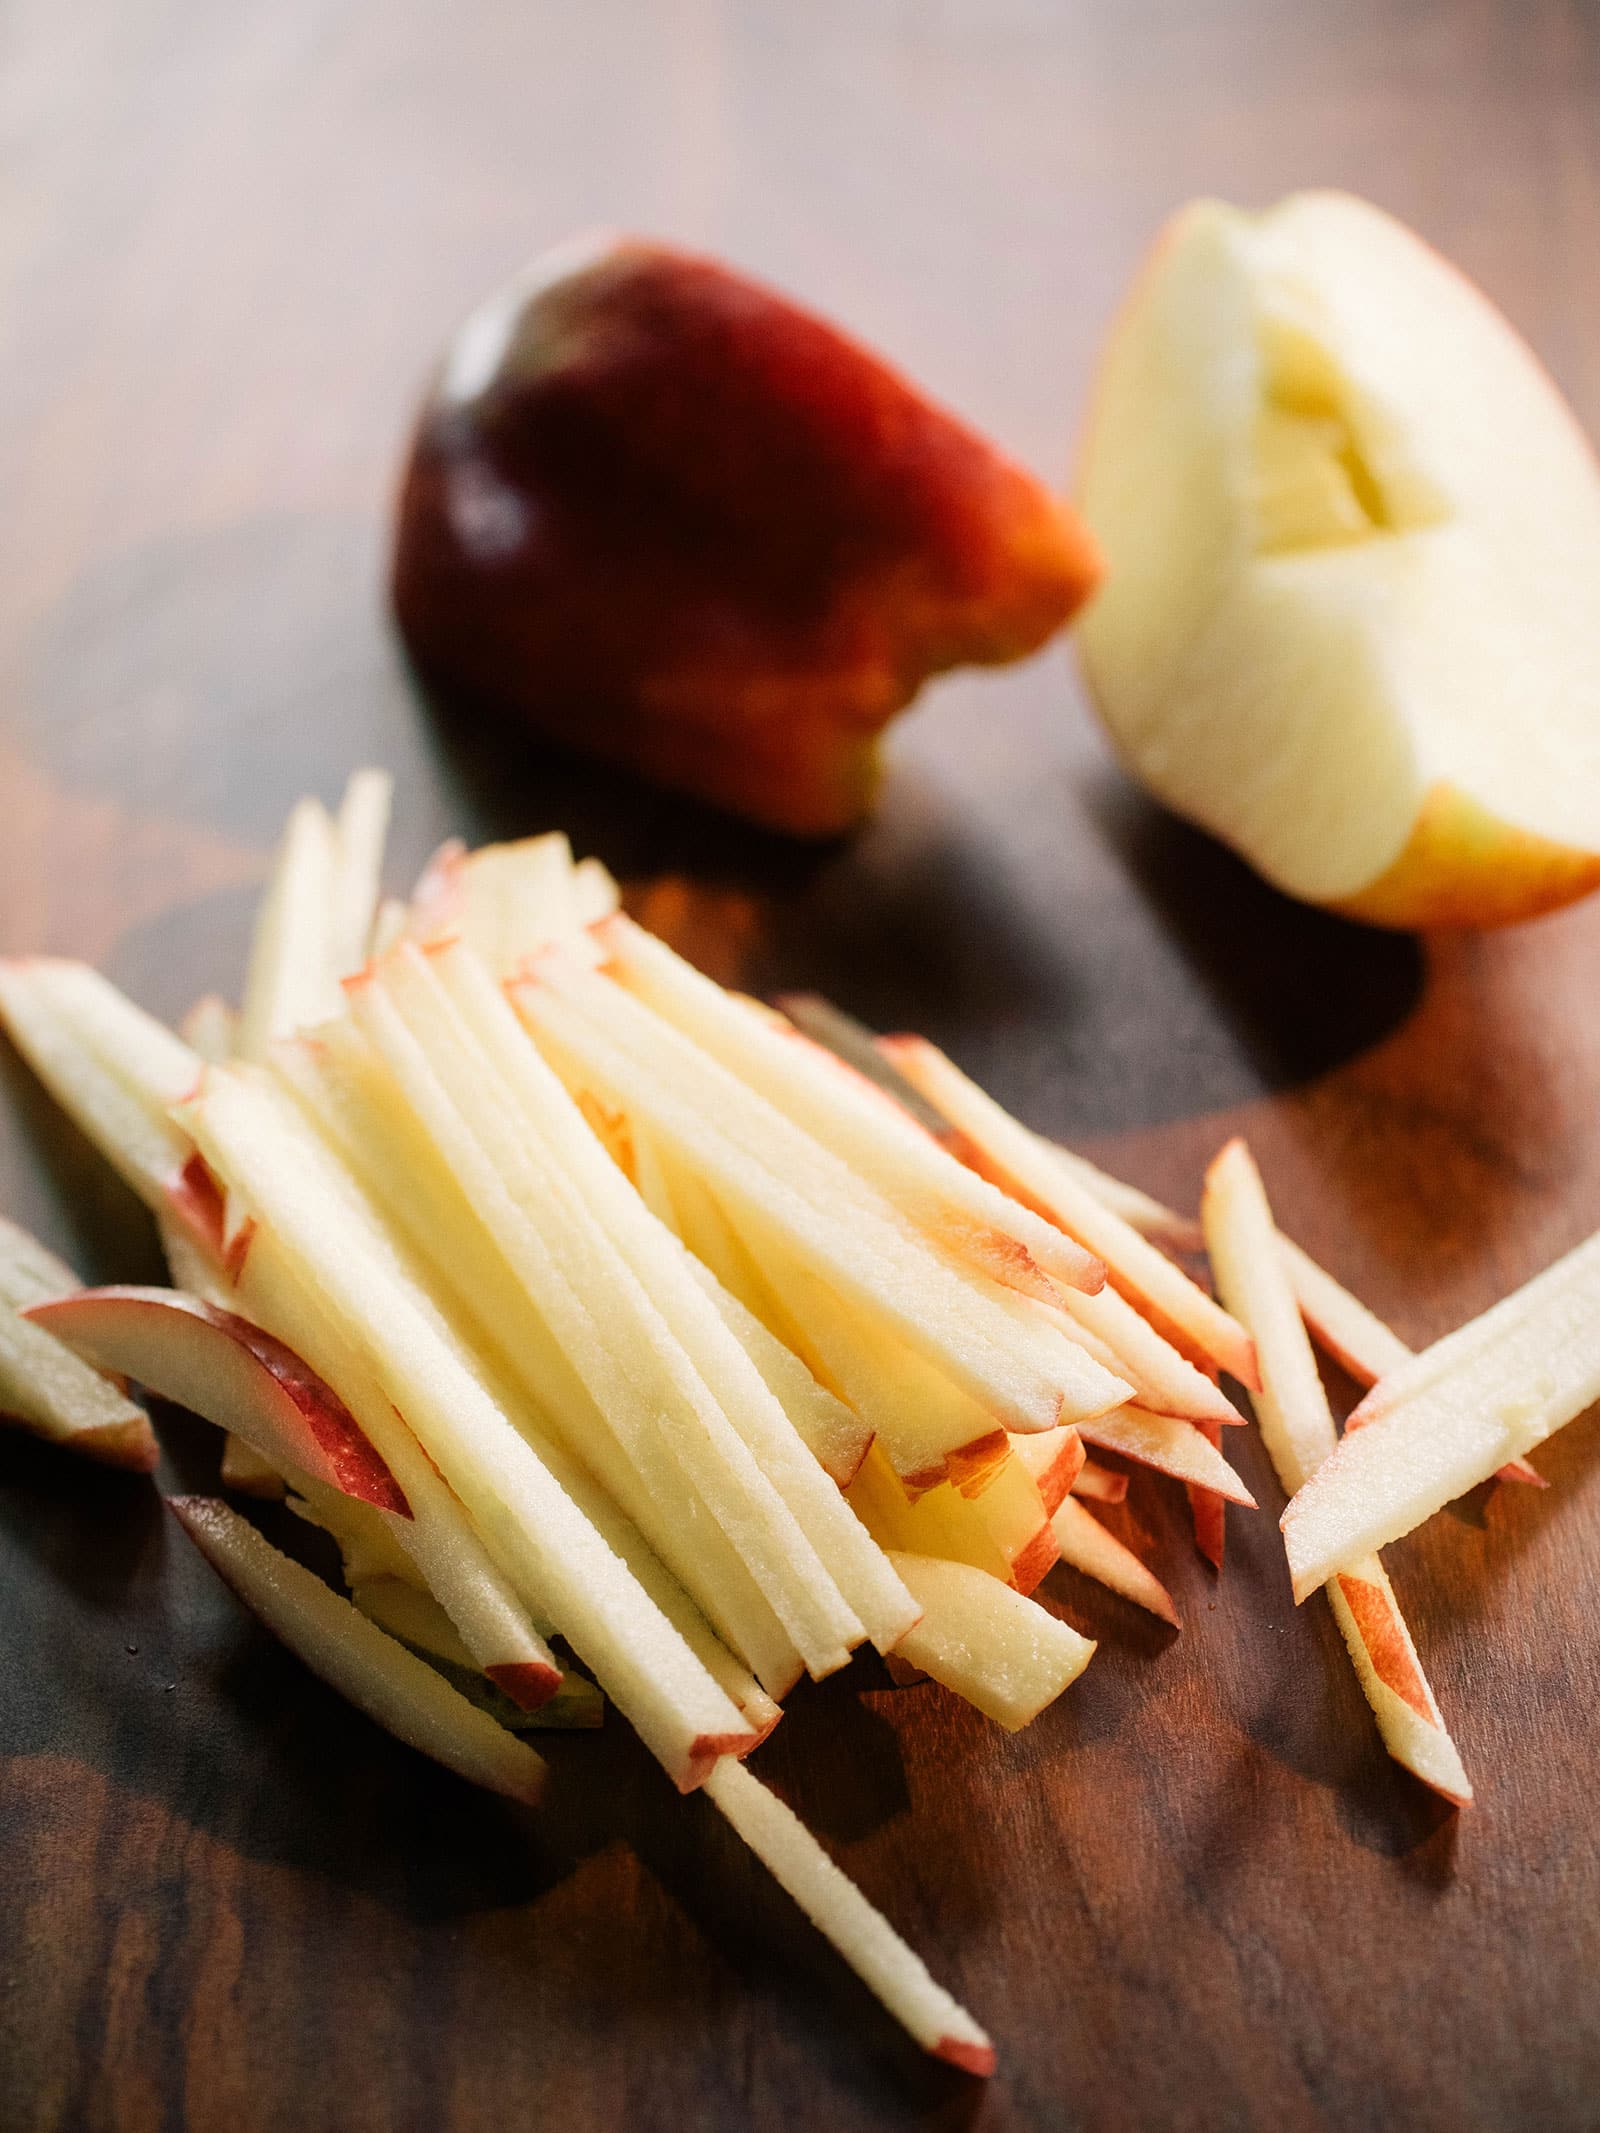 Red apple cut into matchsticks on a wooden cutting board